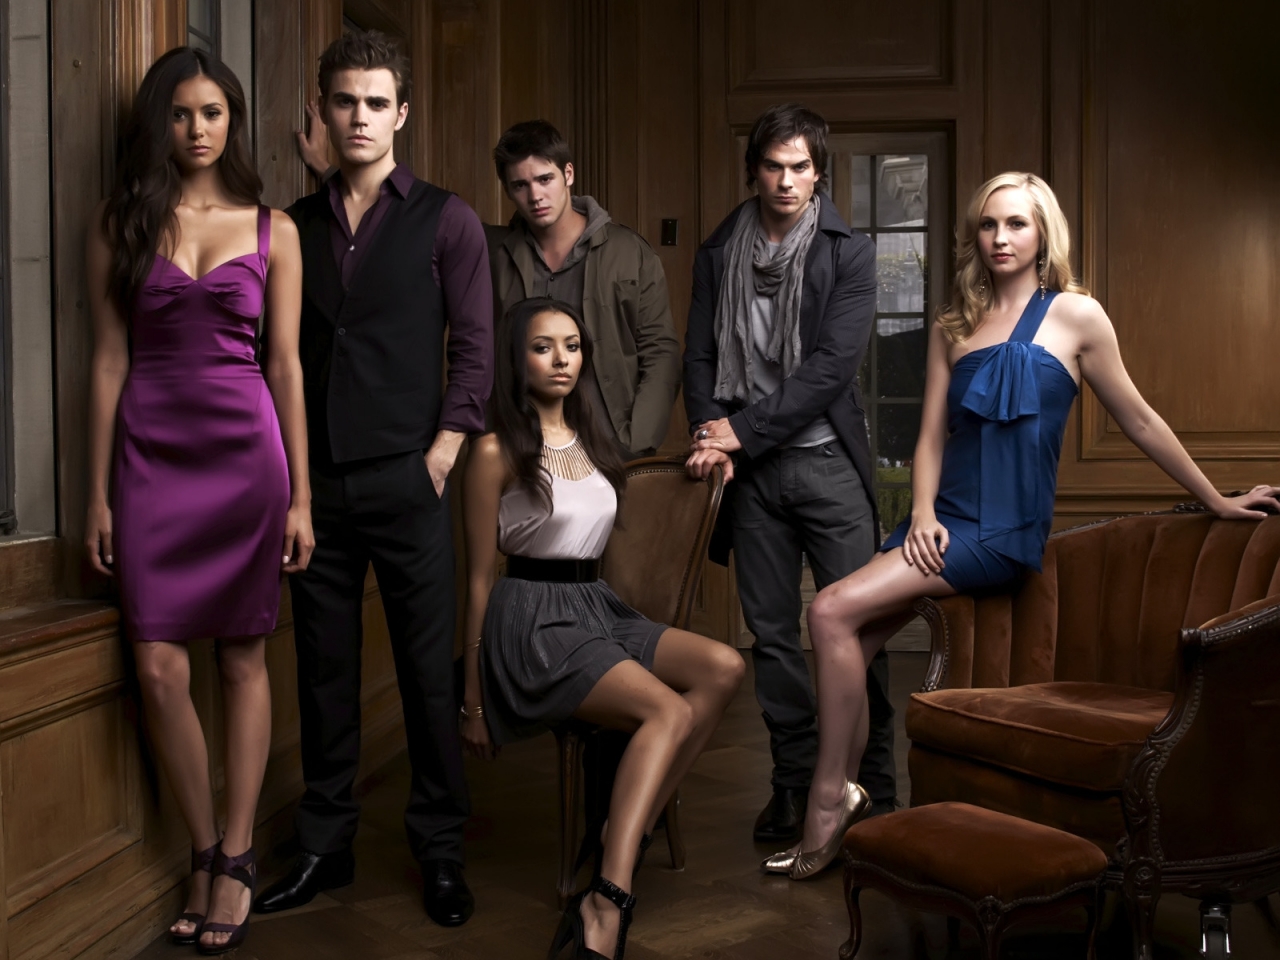 The Vampire Diaries Cast for 1280 x 960 resolution